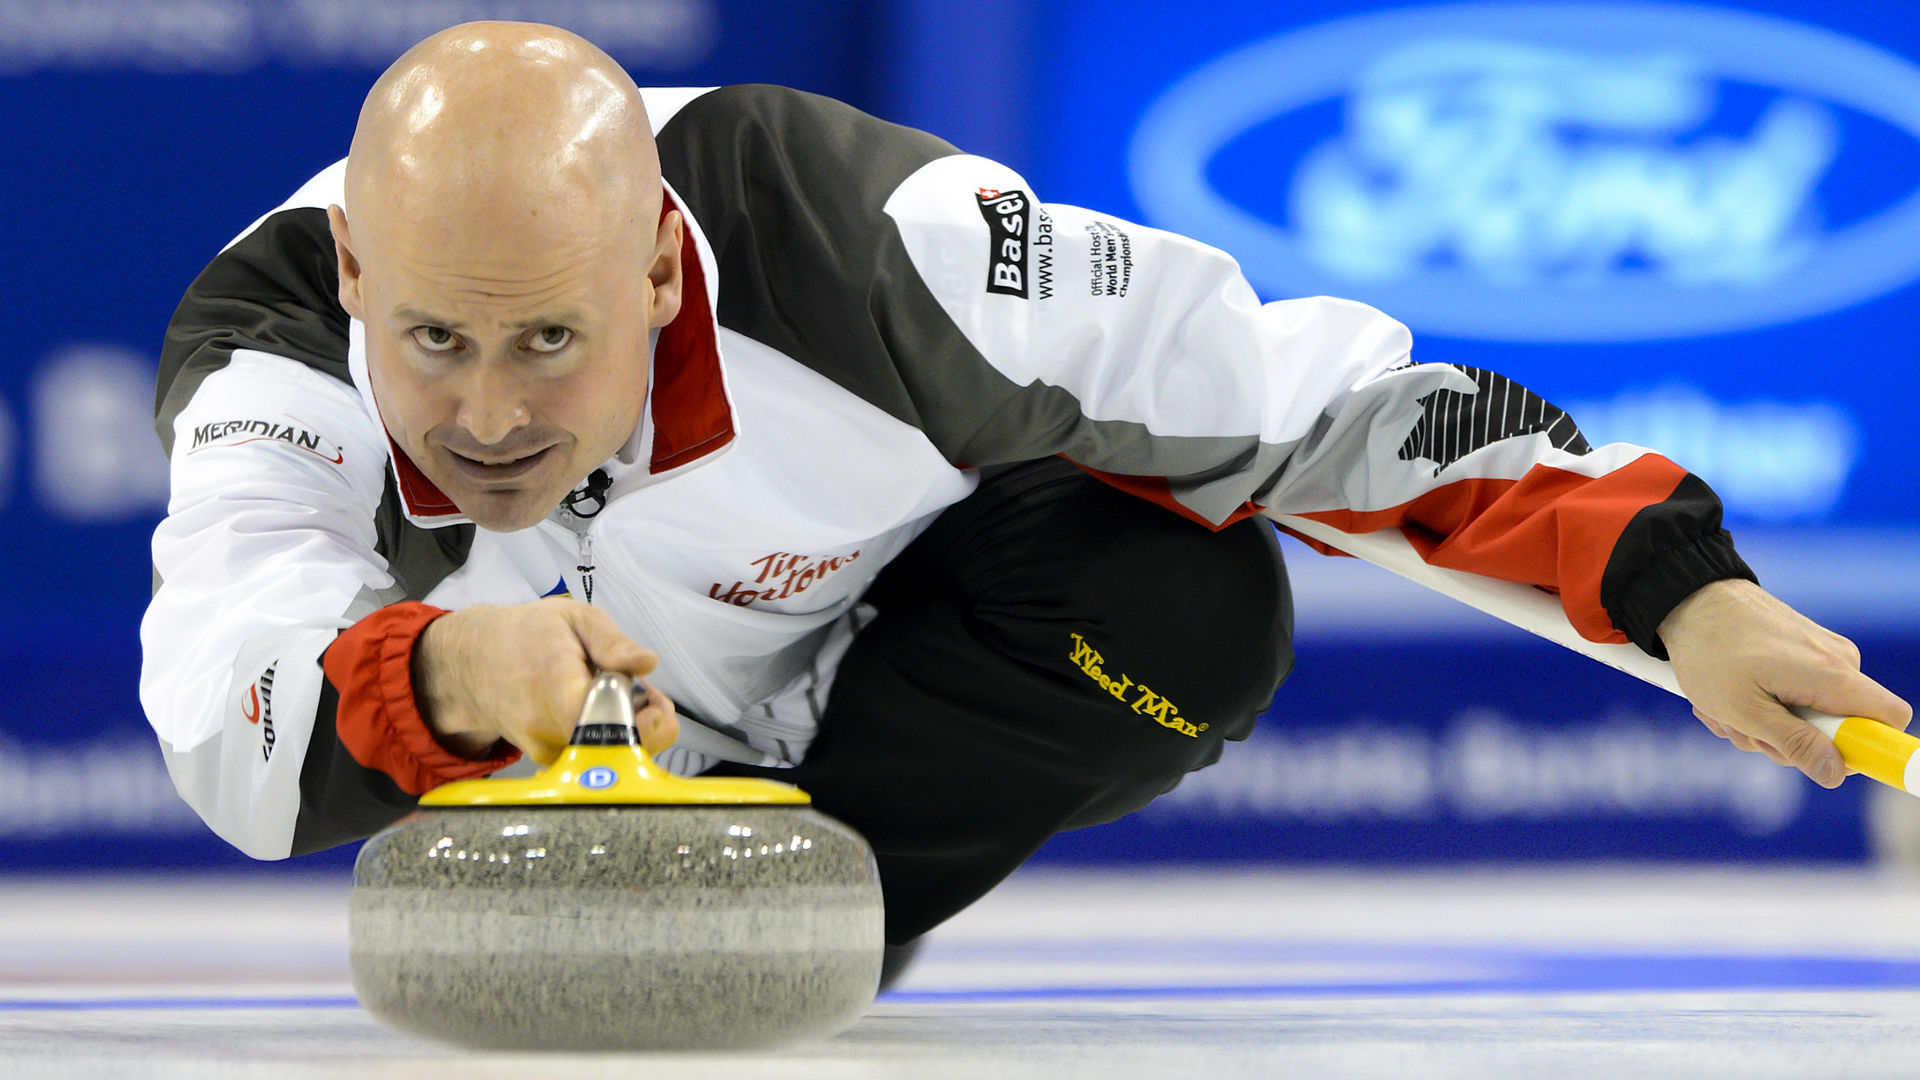 Curling at the 2018 Winter Olympics: Full schedule, medal contenders